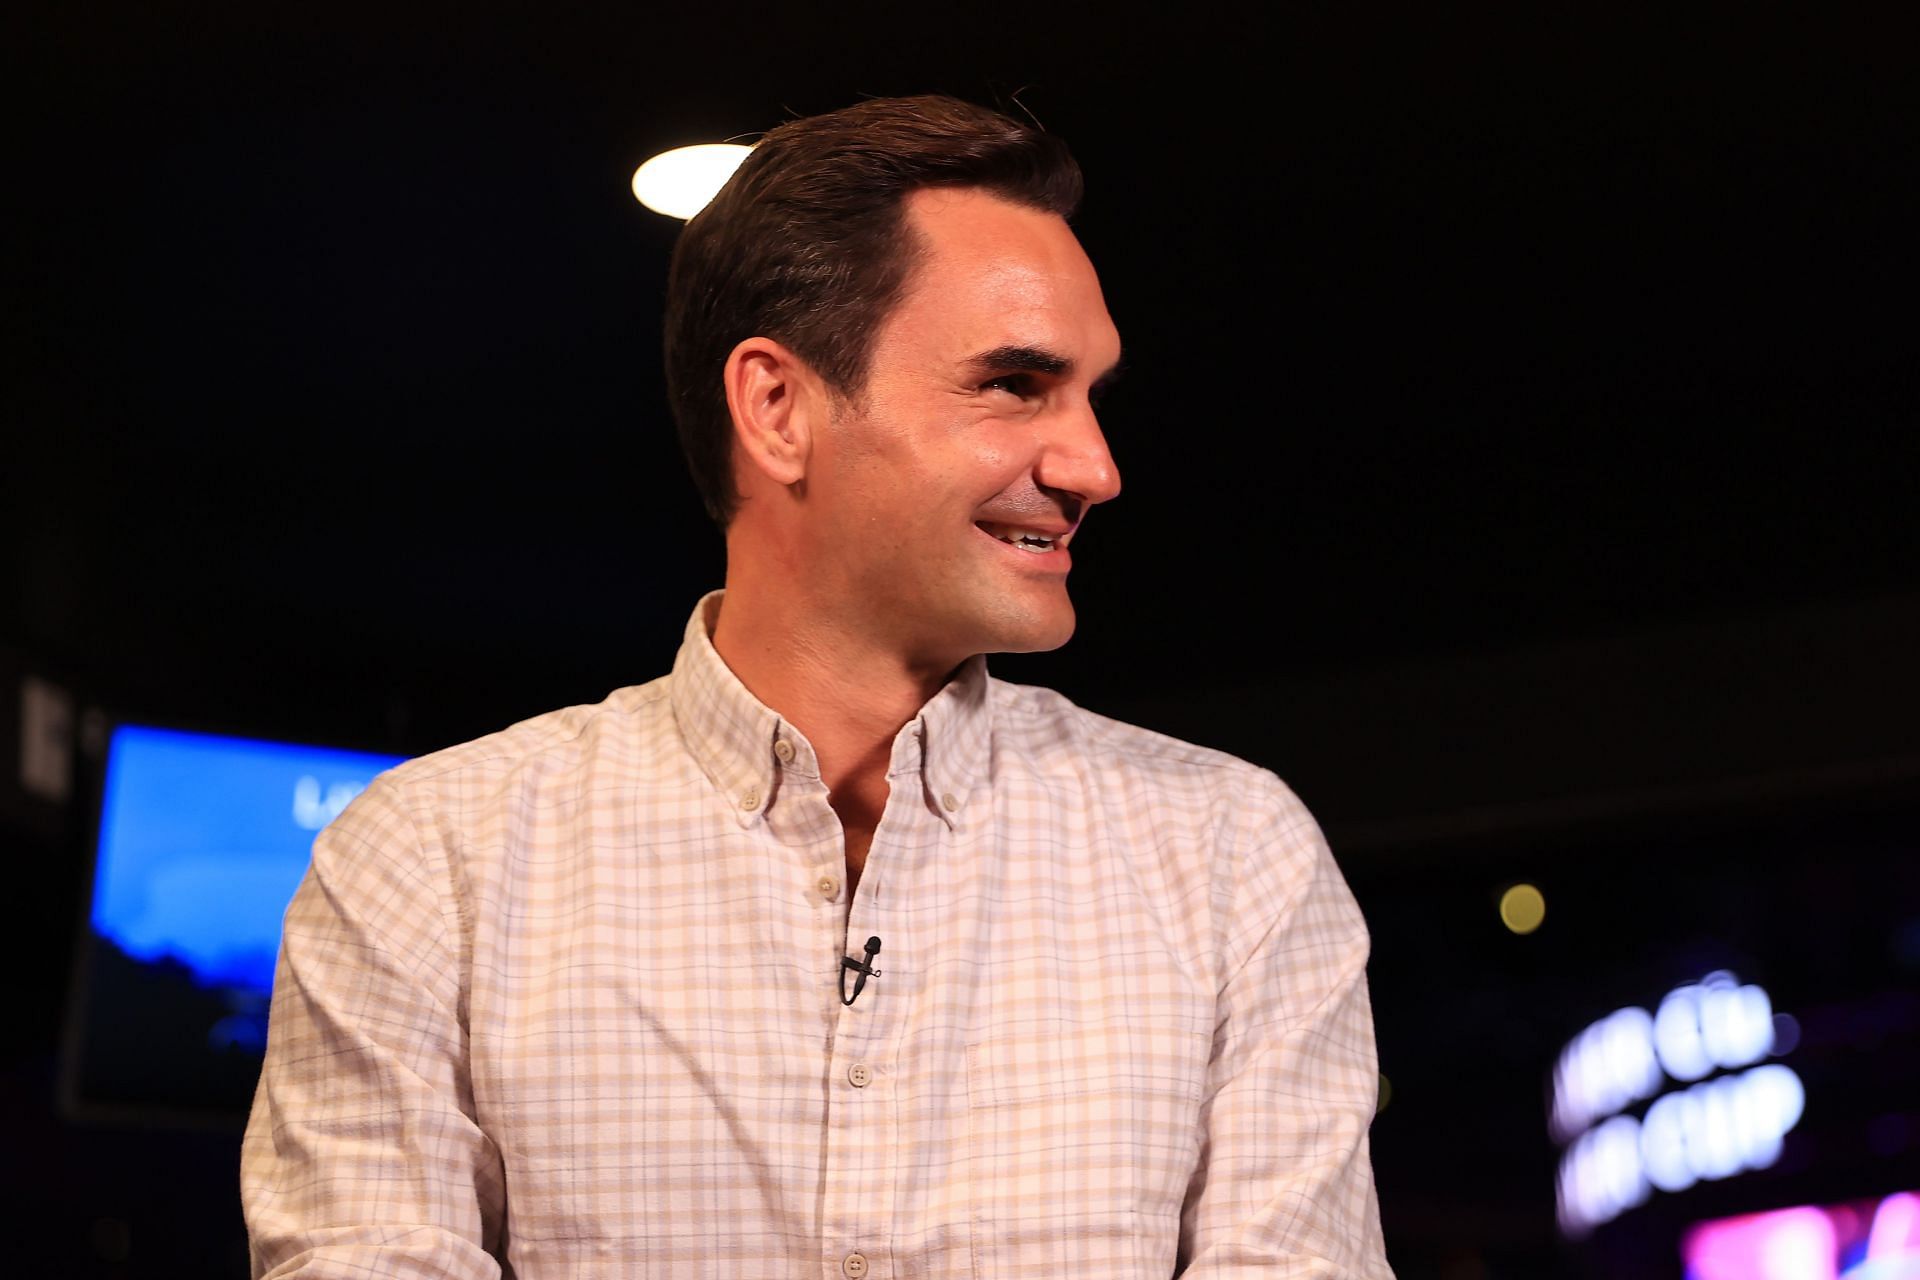 Roger Federer reacts during an interview with Andy Roddick on Day 2 of the 2021 Laver Cup